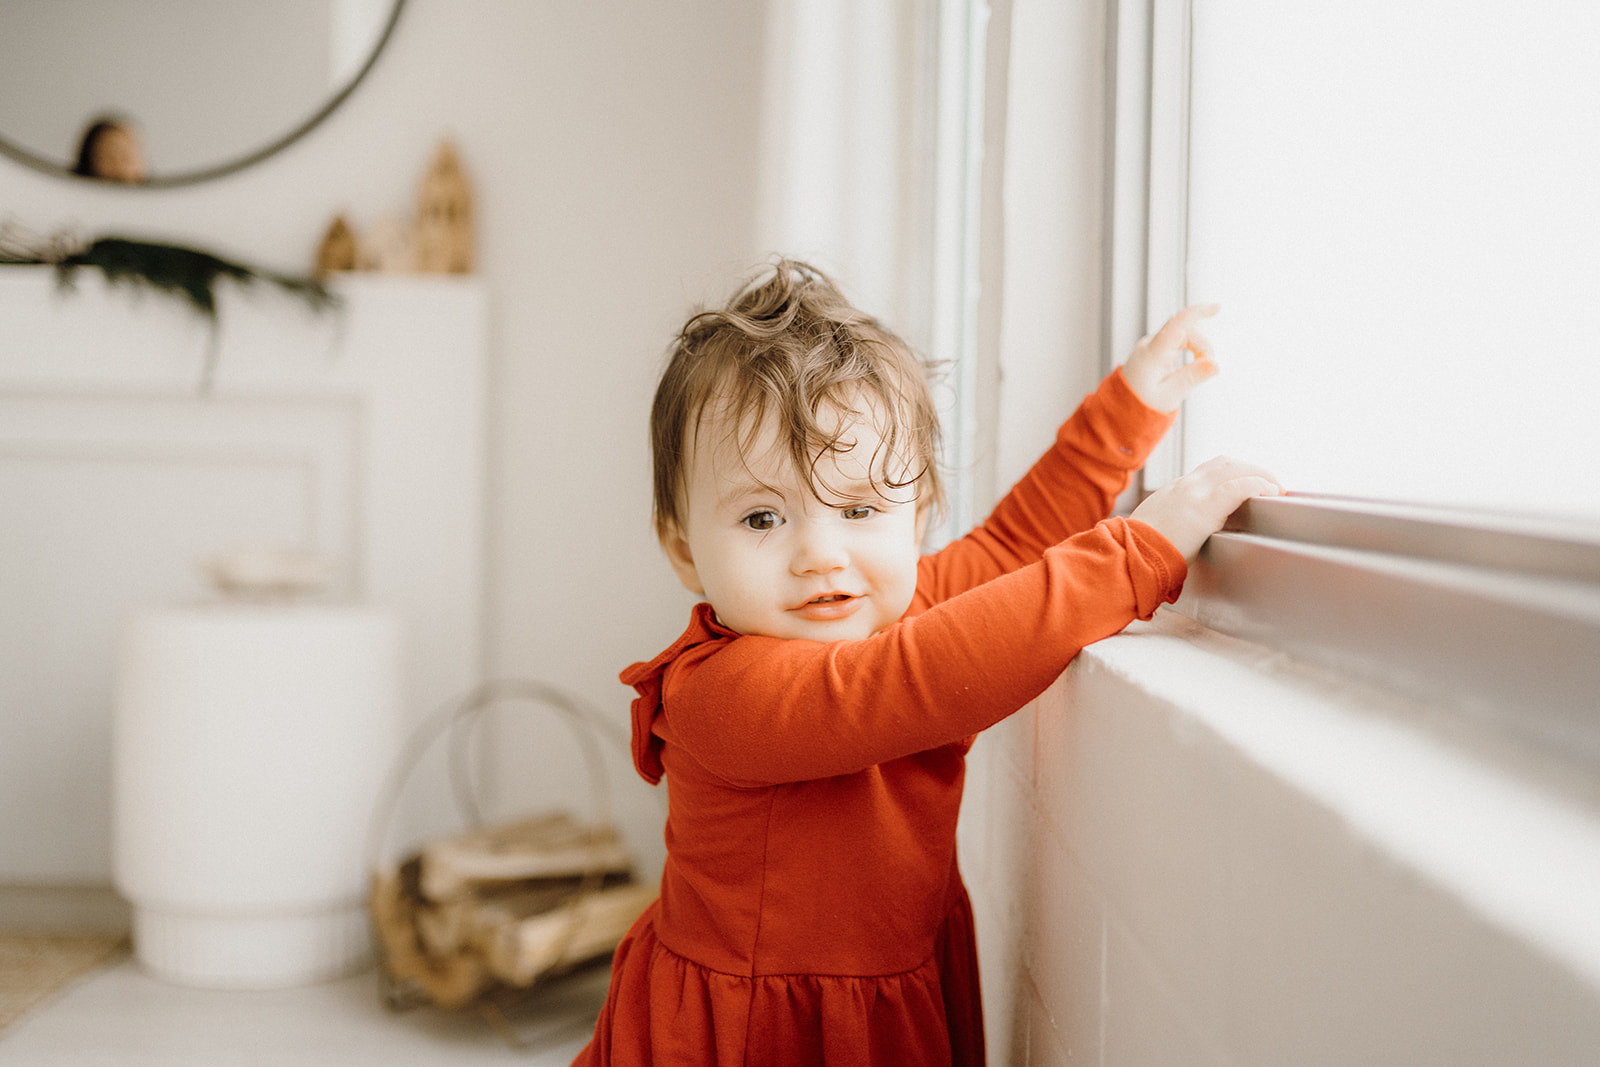 A toddler standing, touching the window.